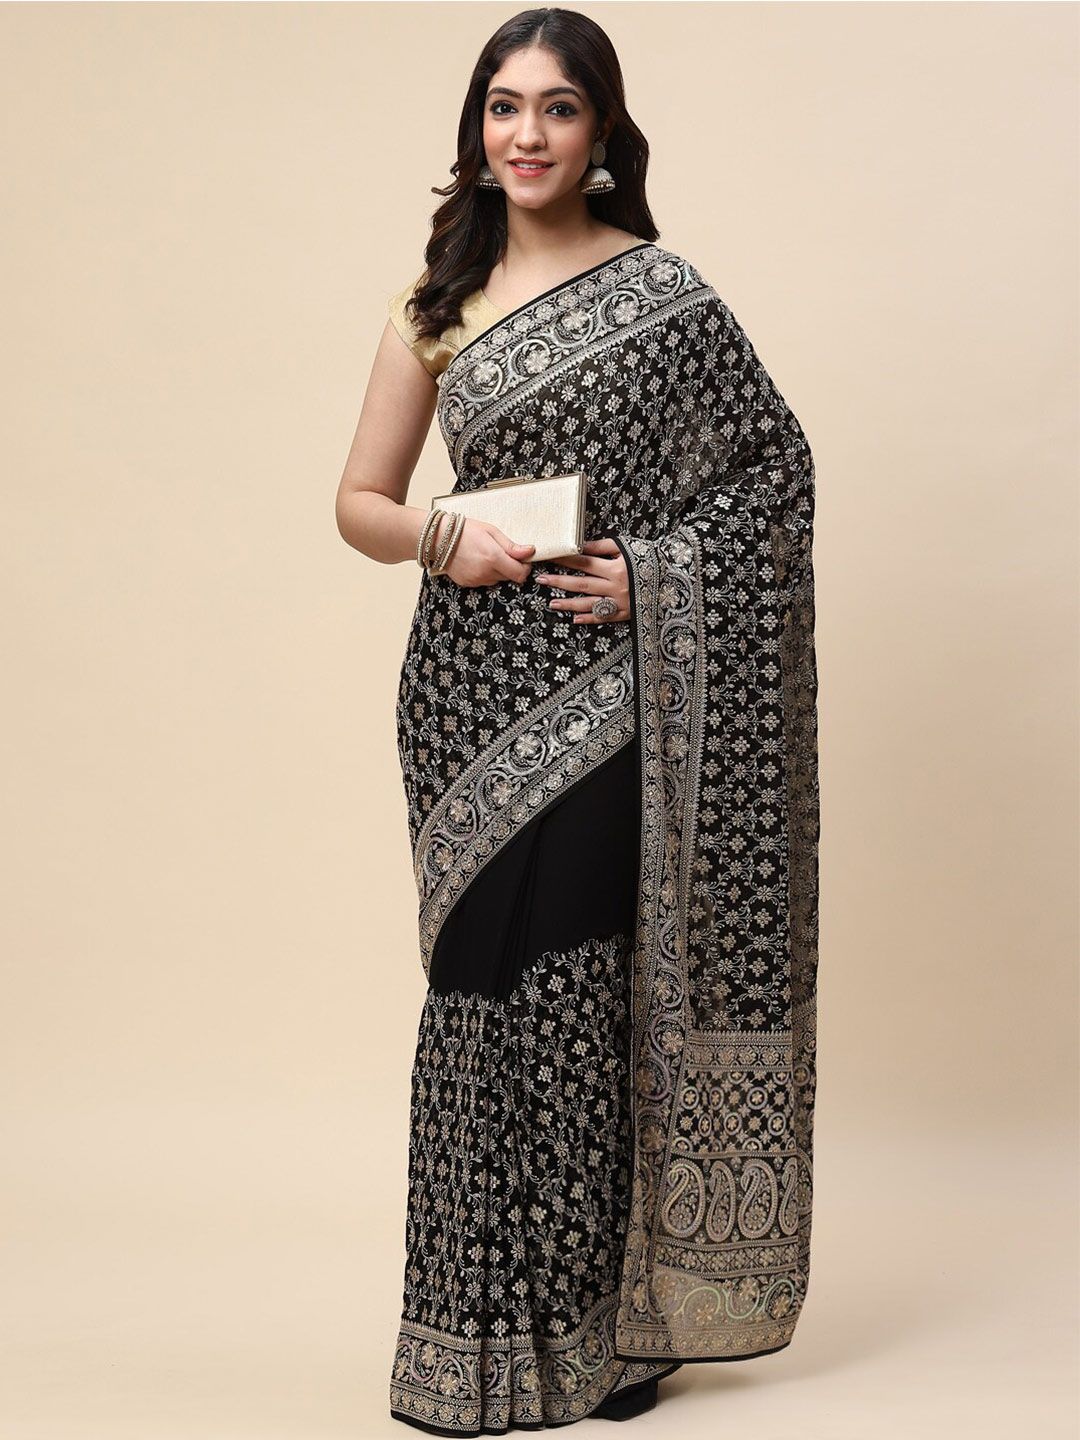 Meena Bazaar Black & Silver-Toned Ethnic Motifs Embroidered Pure Georgette Saree Price in India